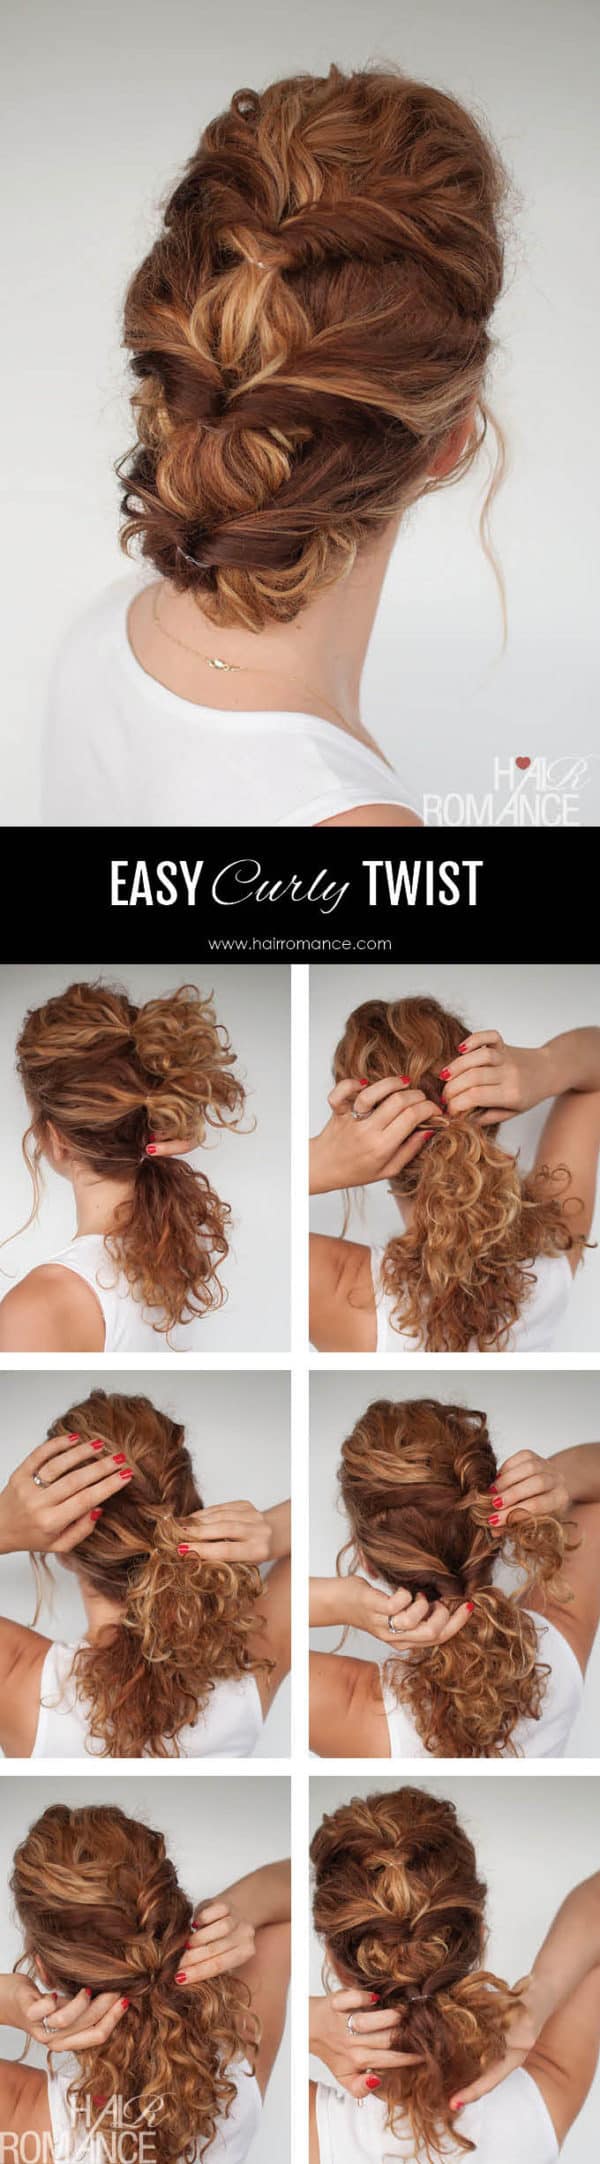 Fantastic Curly Hairstyle Tutorials That You Have To Check Out Now